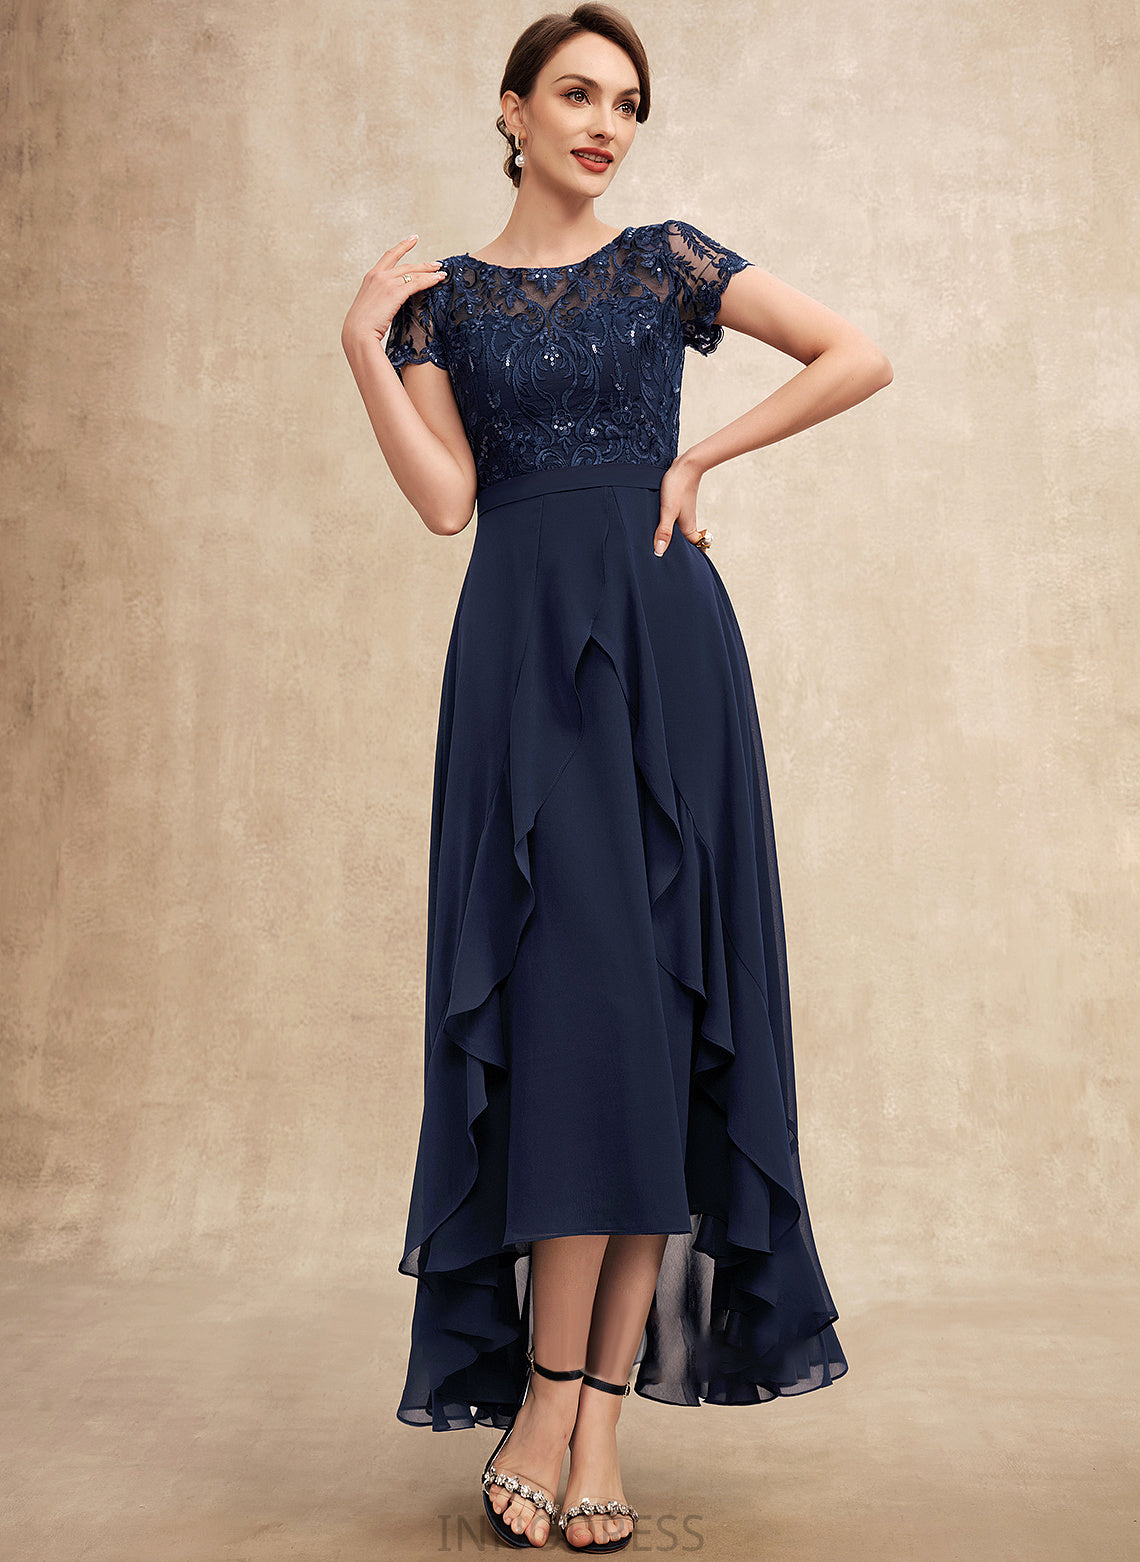 Ruffles A-Line Chiffon Cascading Bow(s) Mother With Olympia Dress Neck Bride Asymmetrical the Scoop Lace of Sequins Mother of the Bride Dresses